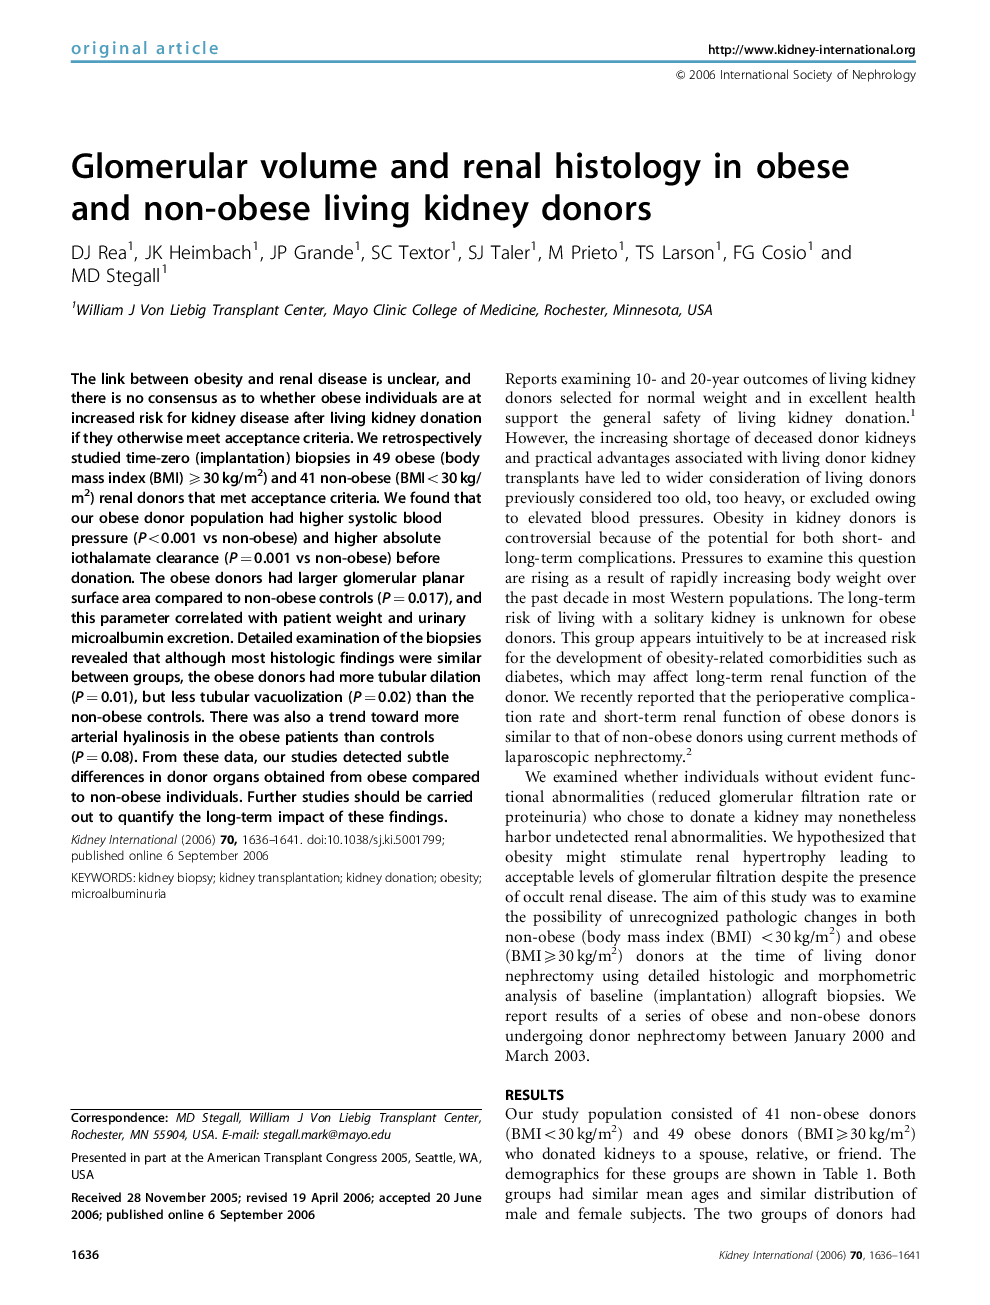 Glomerular volume and renal histology in obese and non-obese living kidney donors 